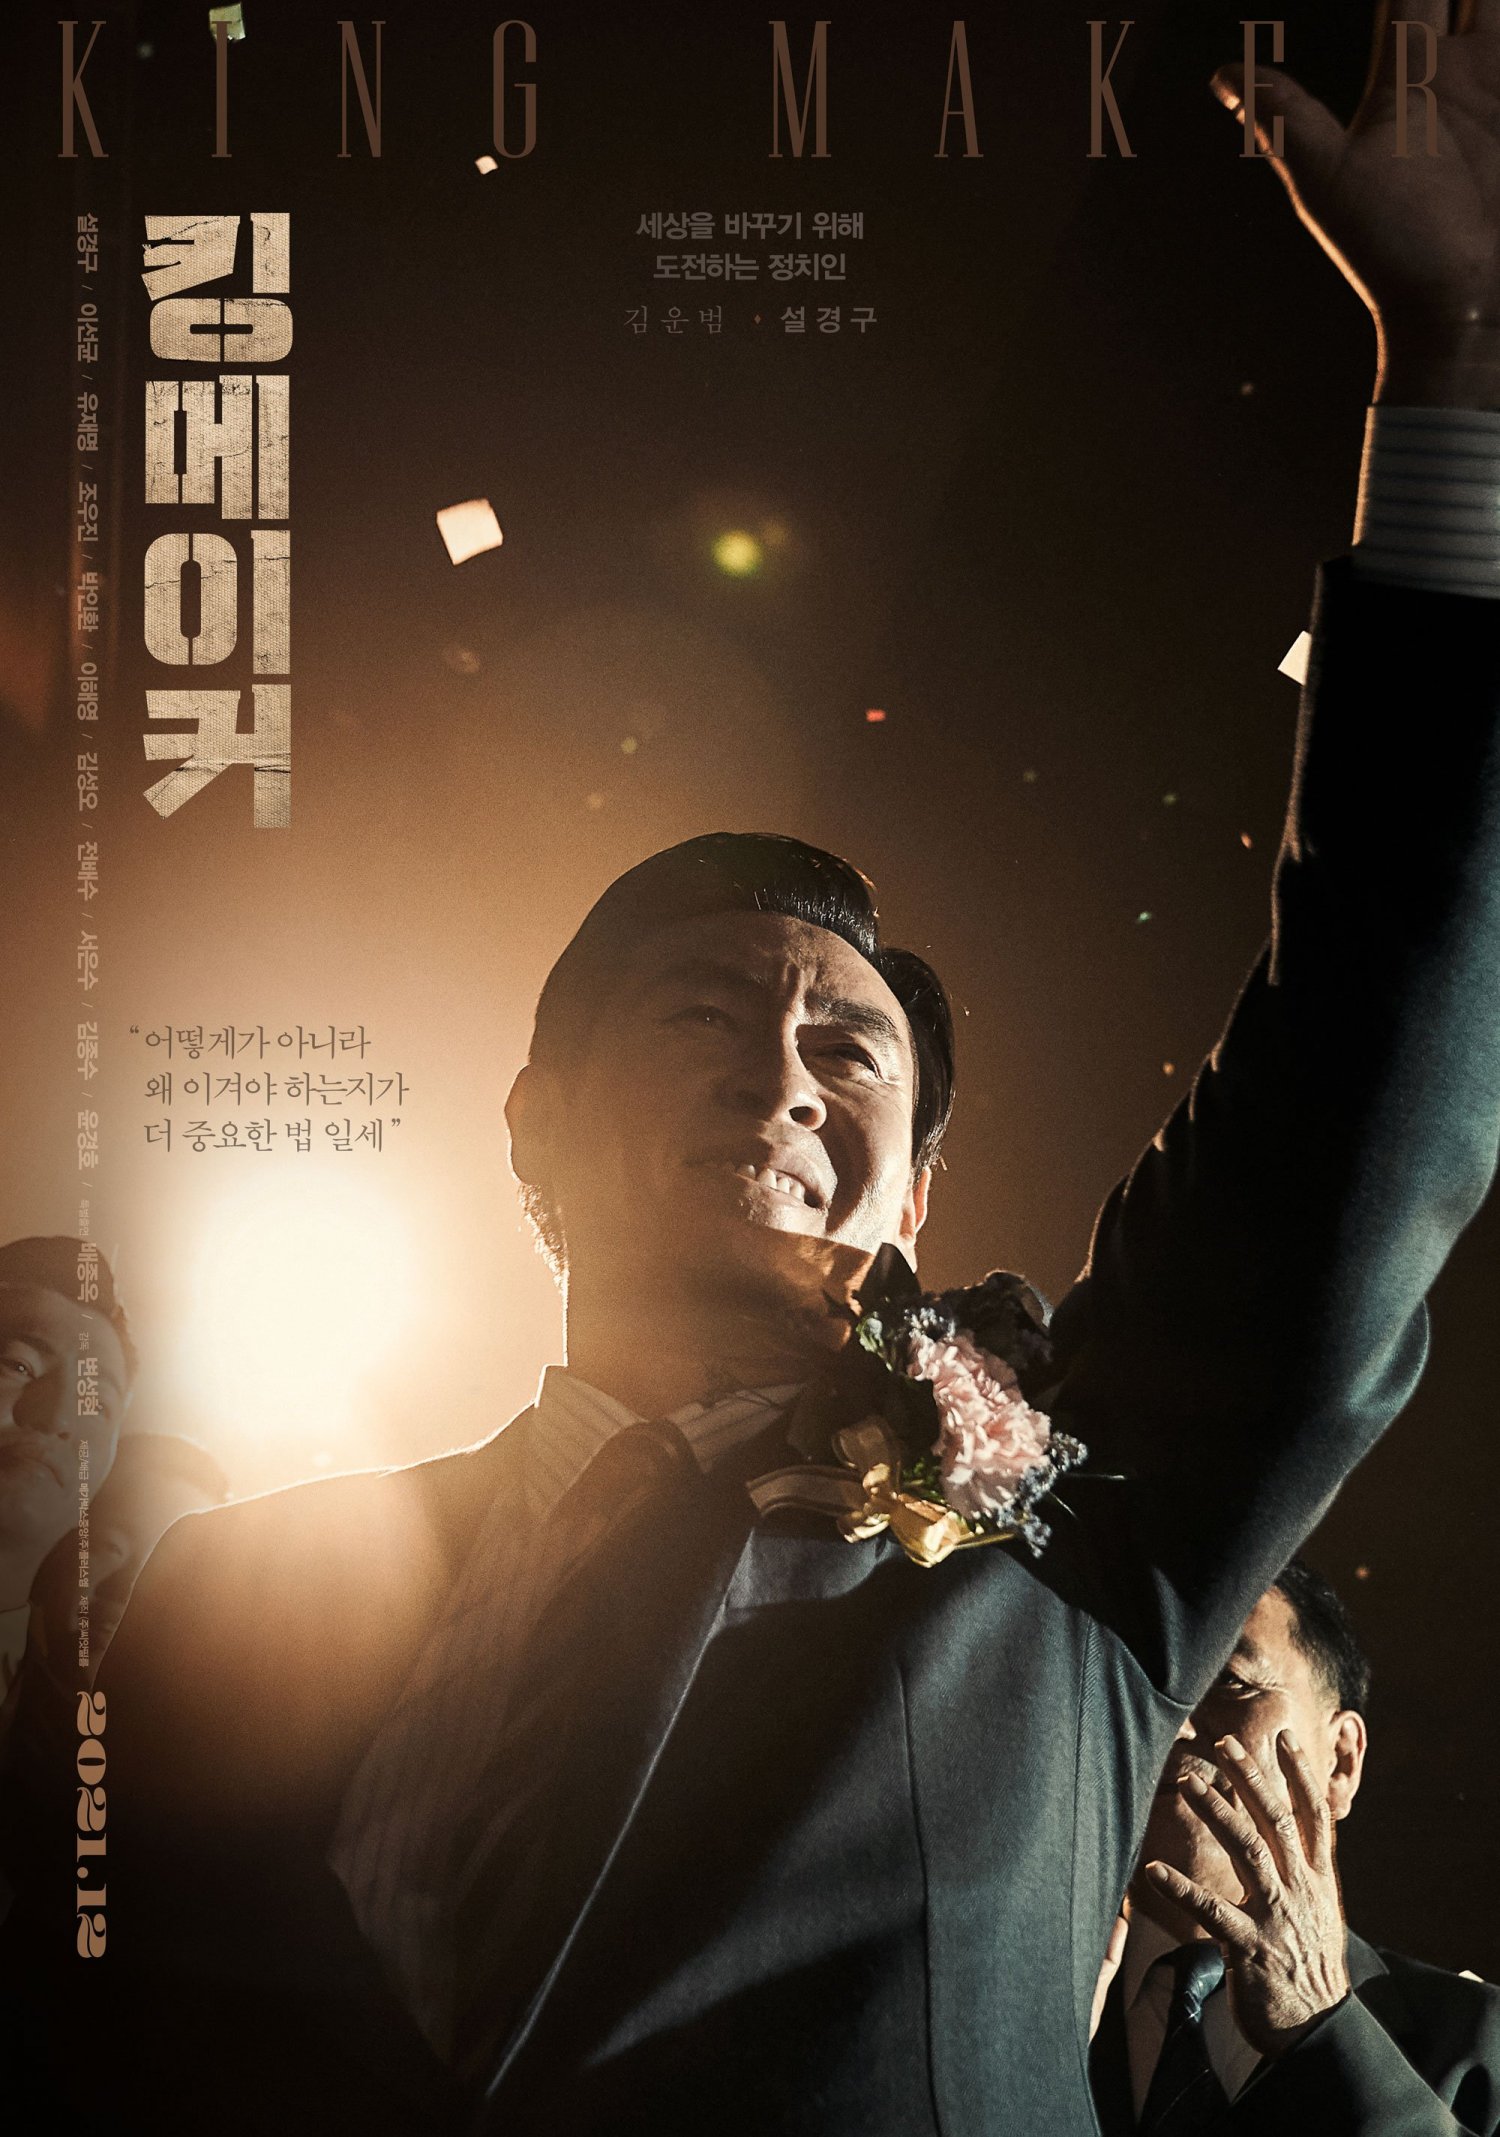 [Photos] New Character Posters Added for the Upcoming Korean Movie ...